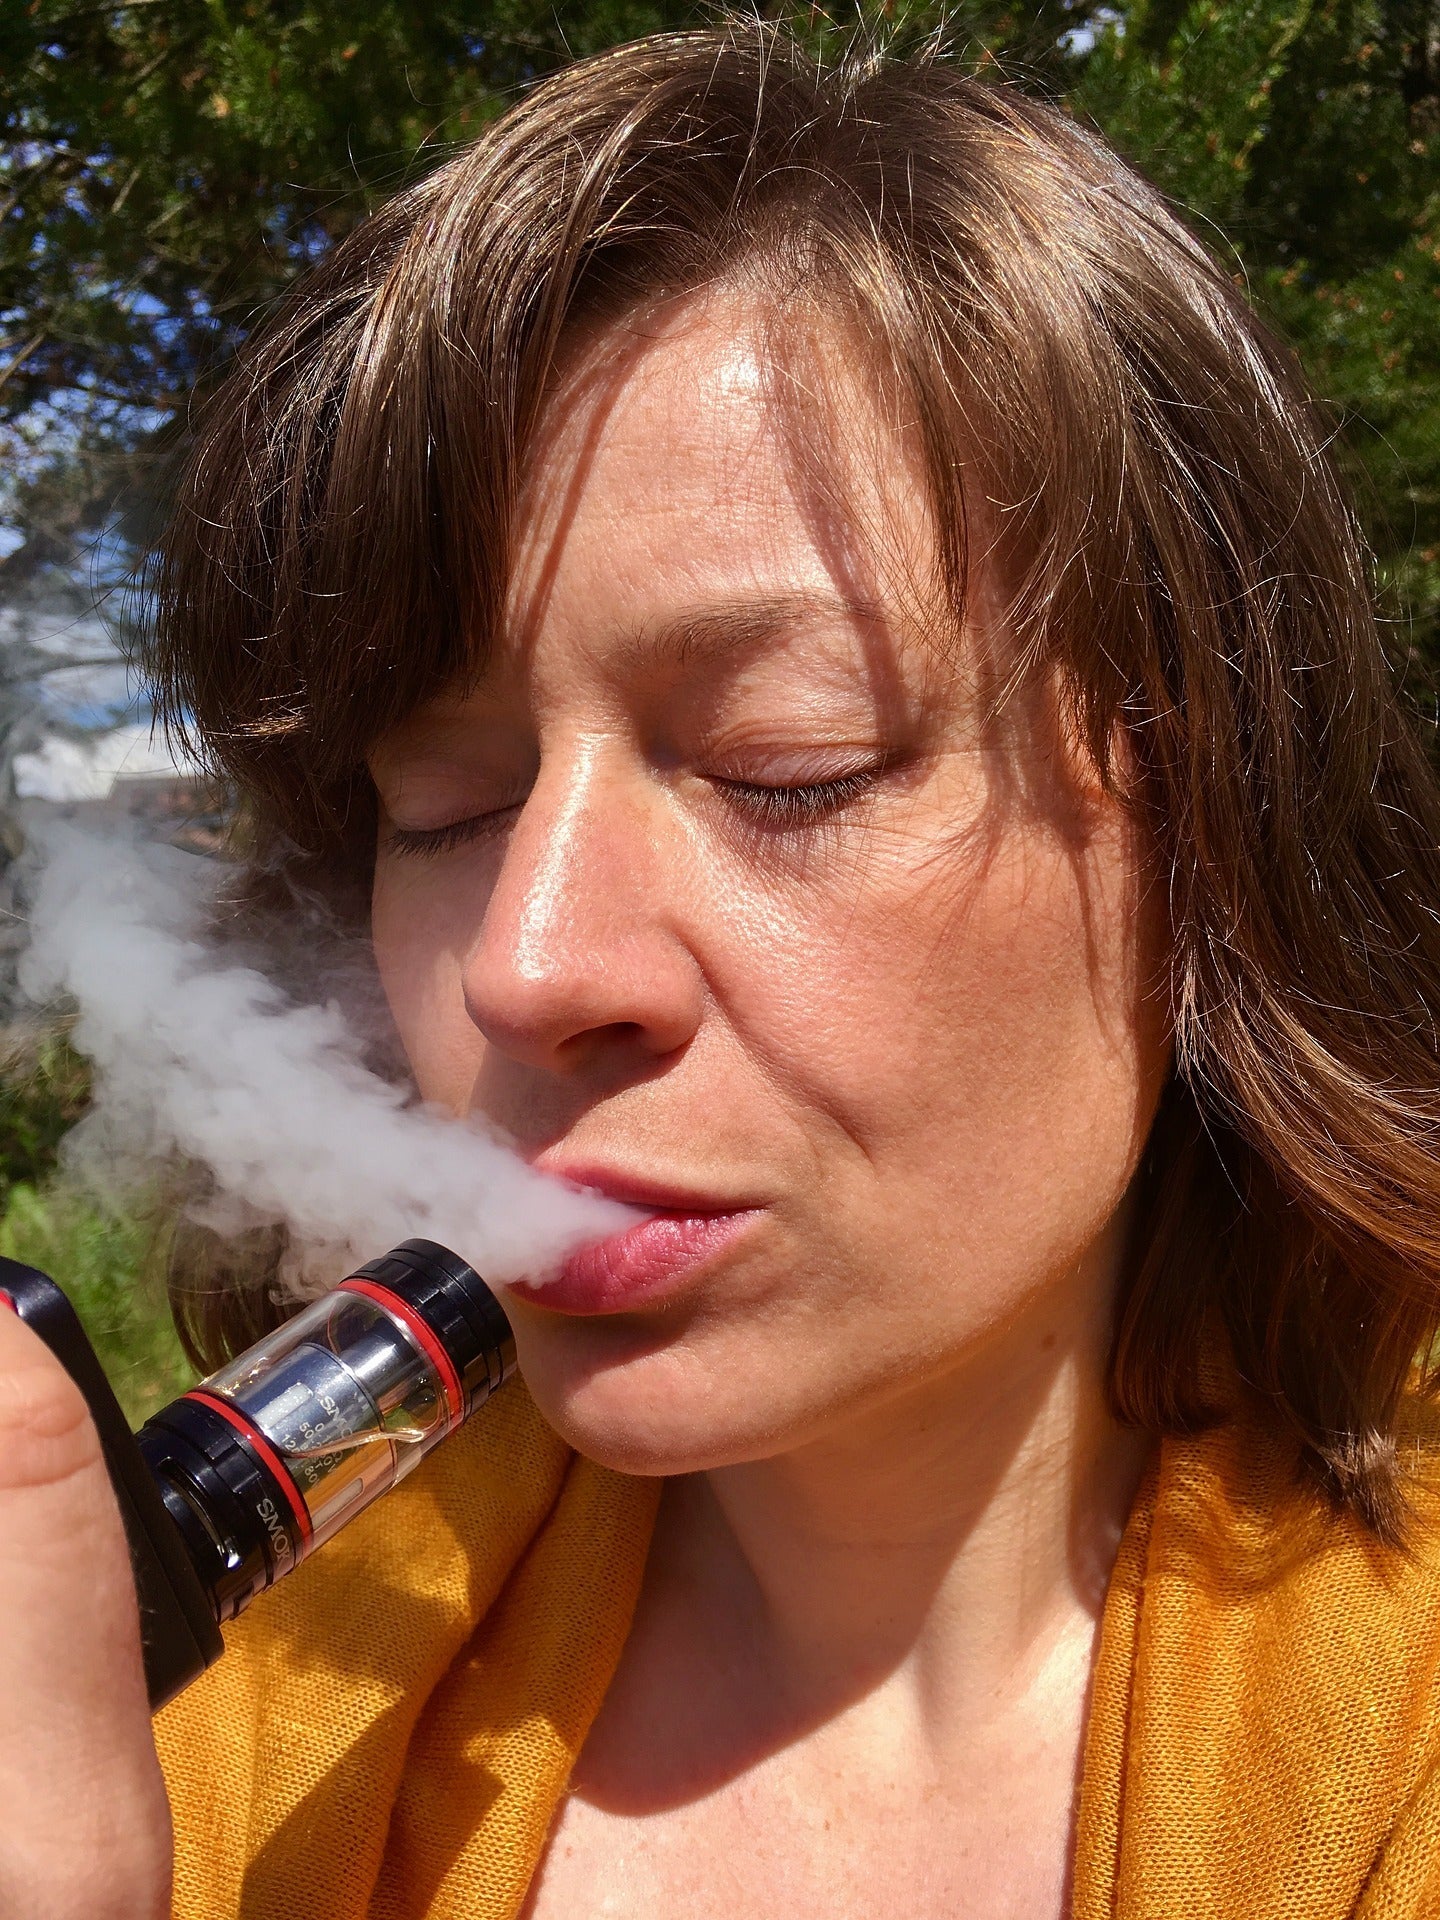 A Beginner's Guide to Sub-Ohm Vaping - What to Know